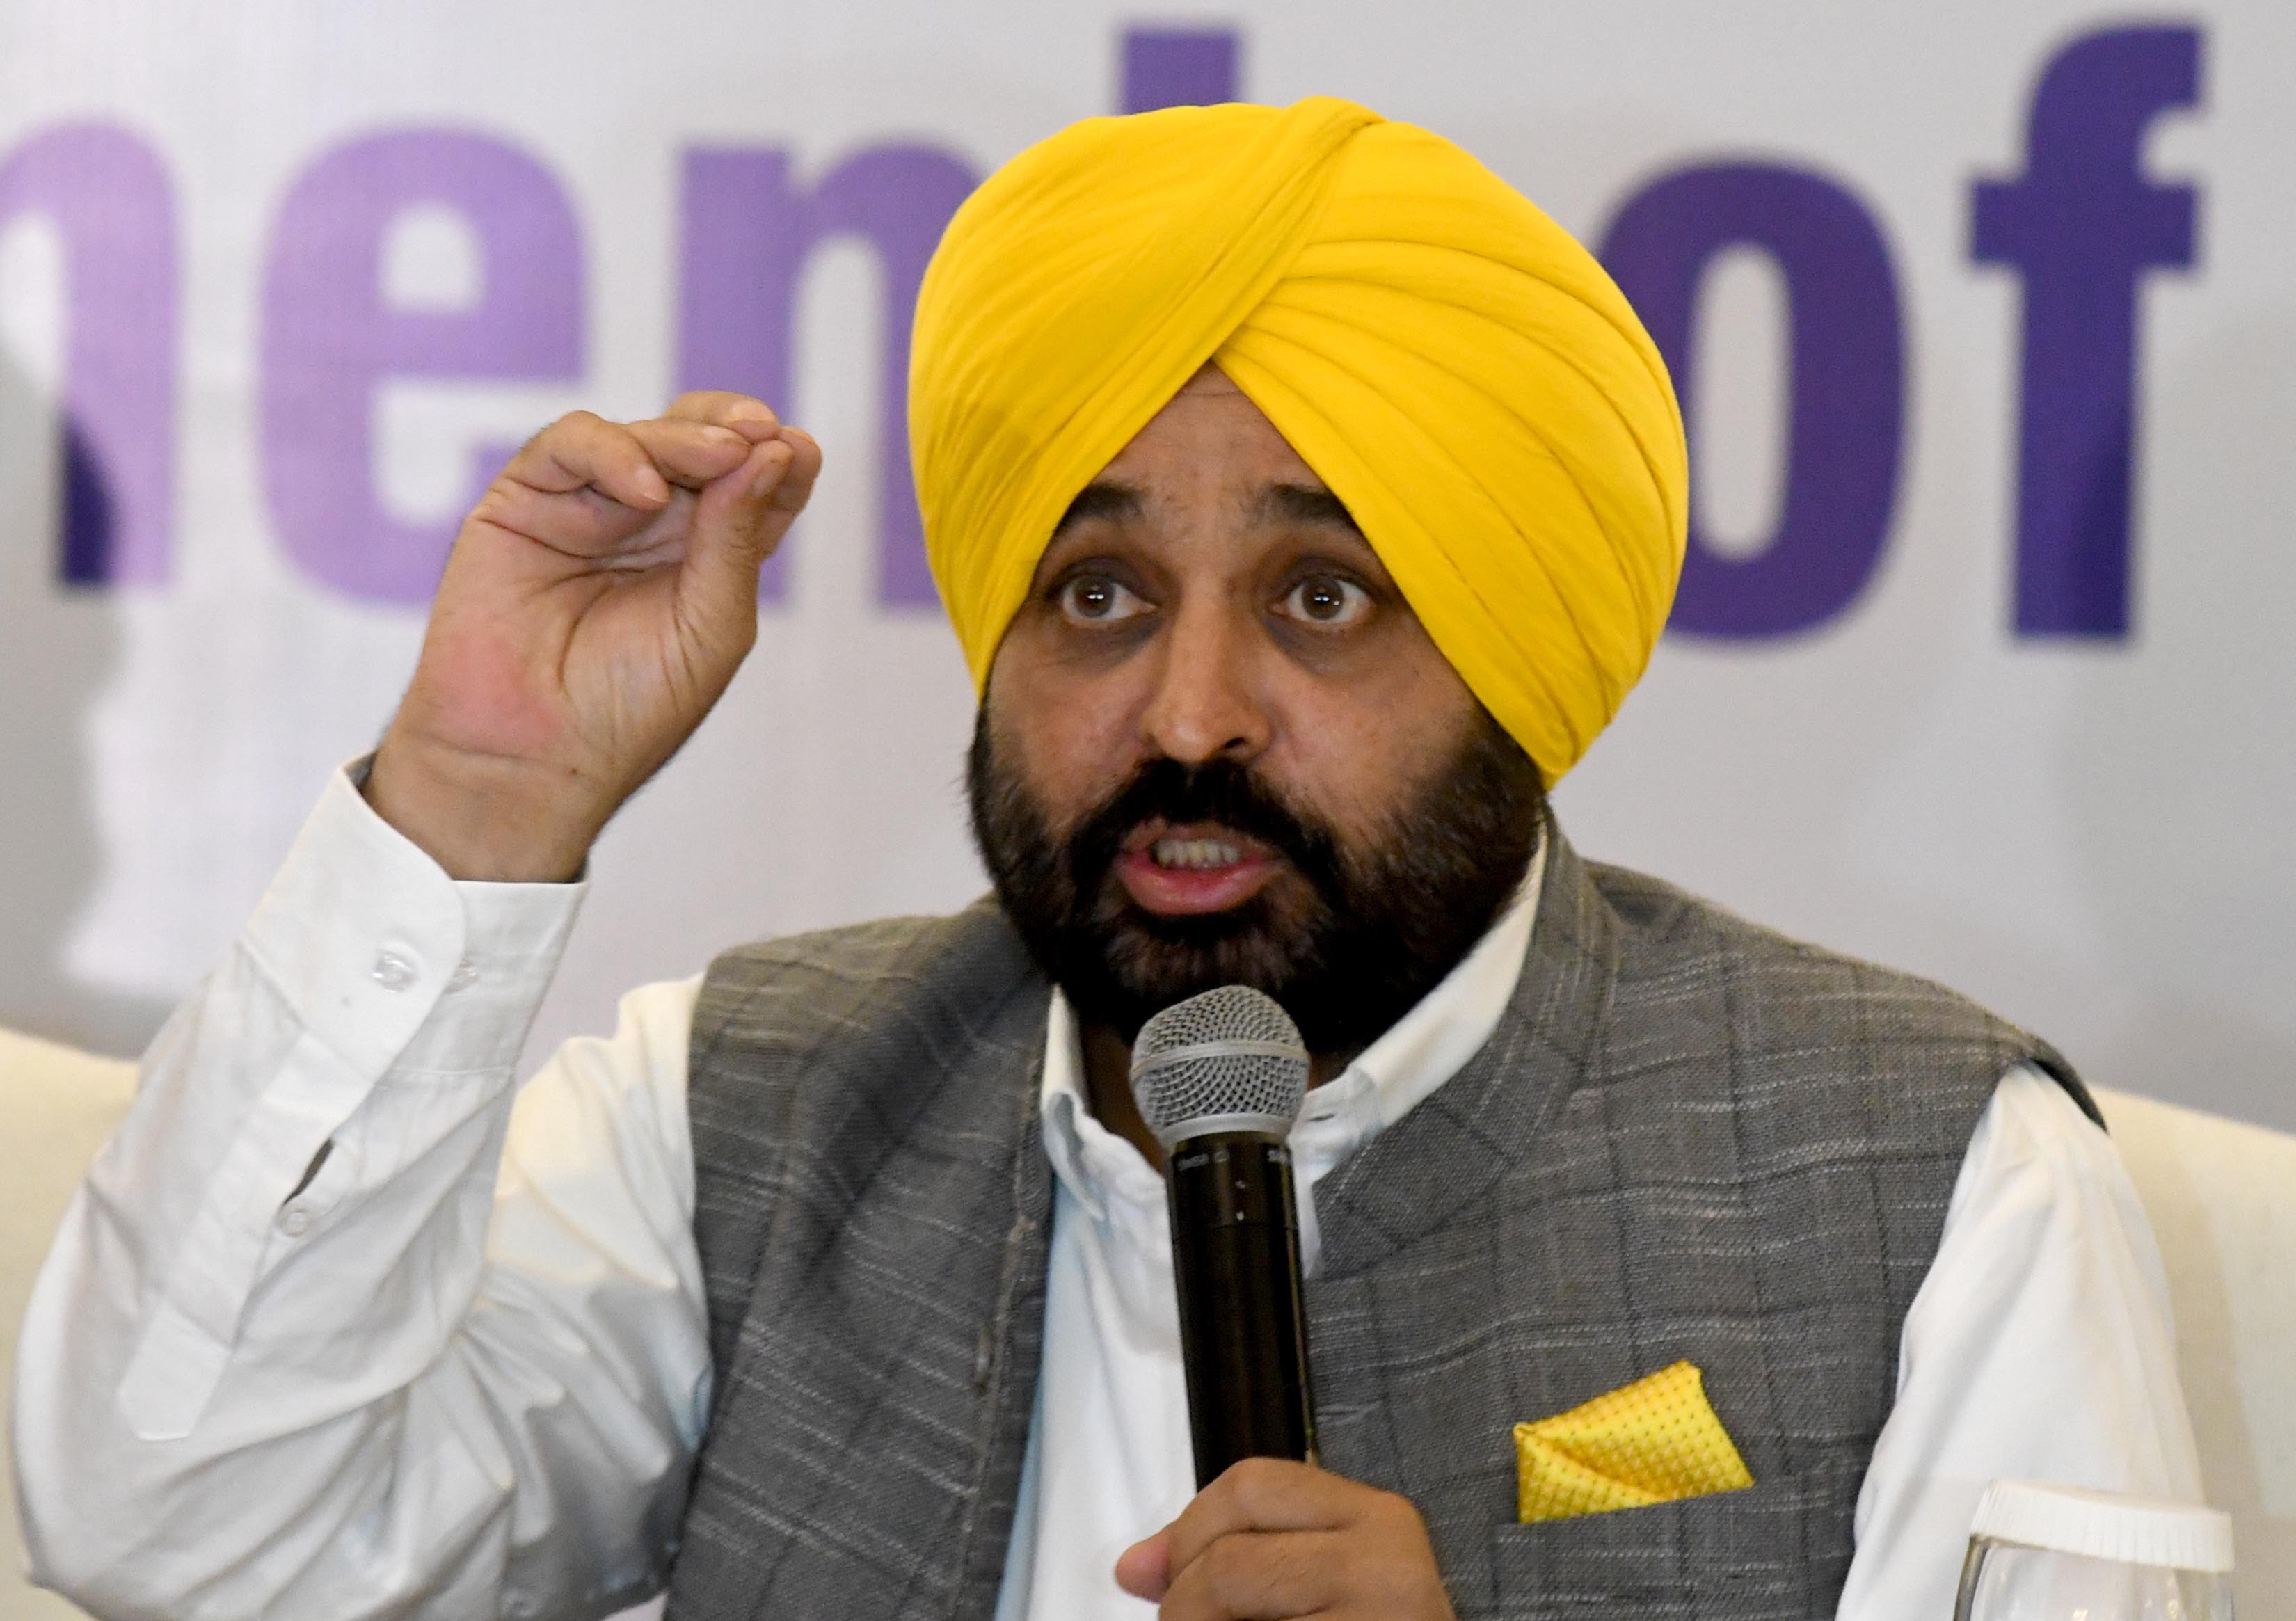 Those who try to disturb Punjab’s peace will be severely dealt with: Punjab CM